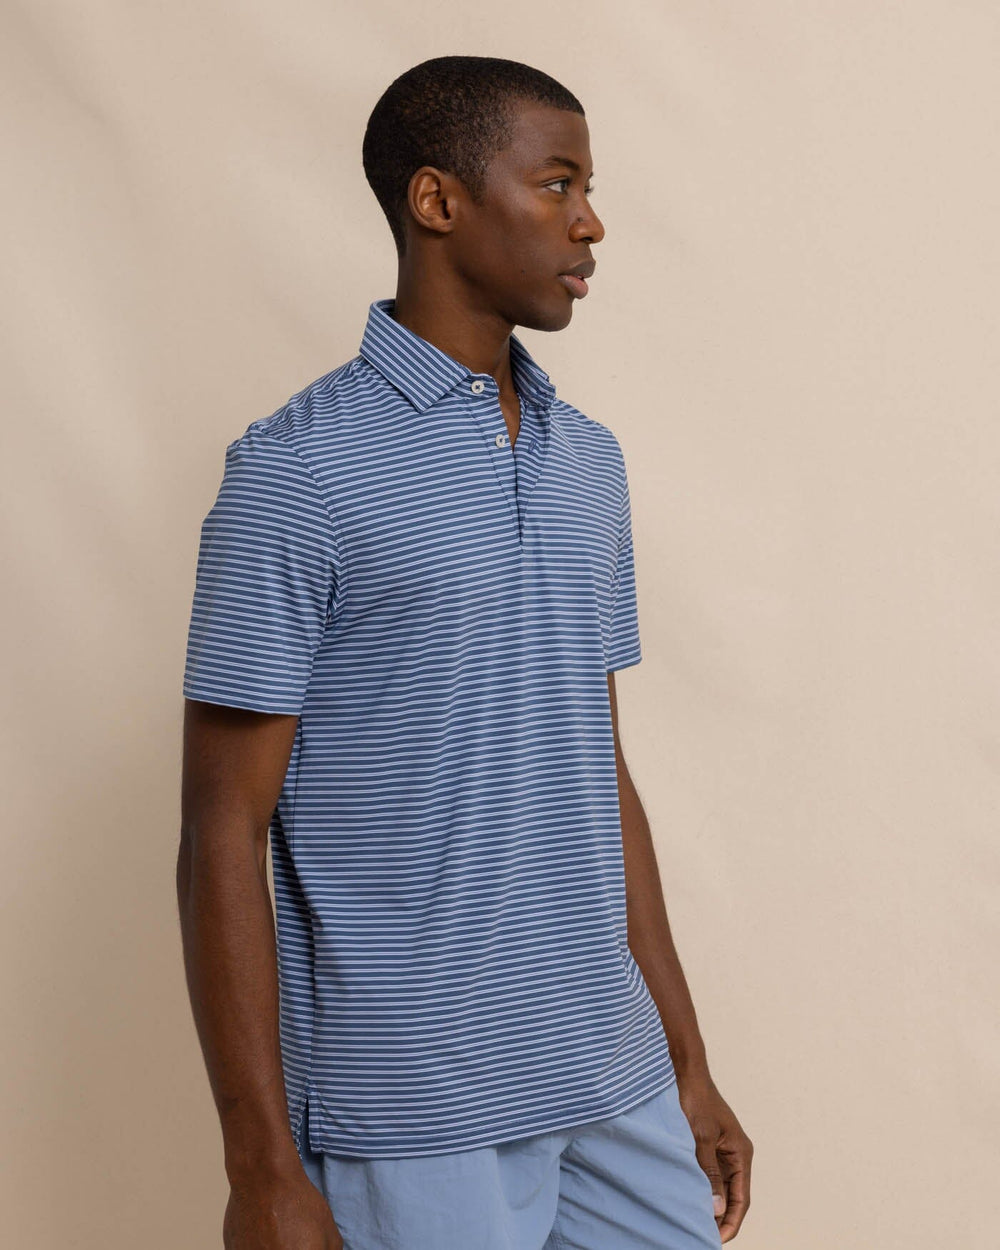 The front view of the Southern Tide brrr eeze Beattie Stripe Performance Polo by Southern Tide - Aged Denim